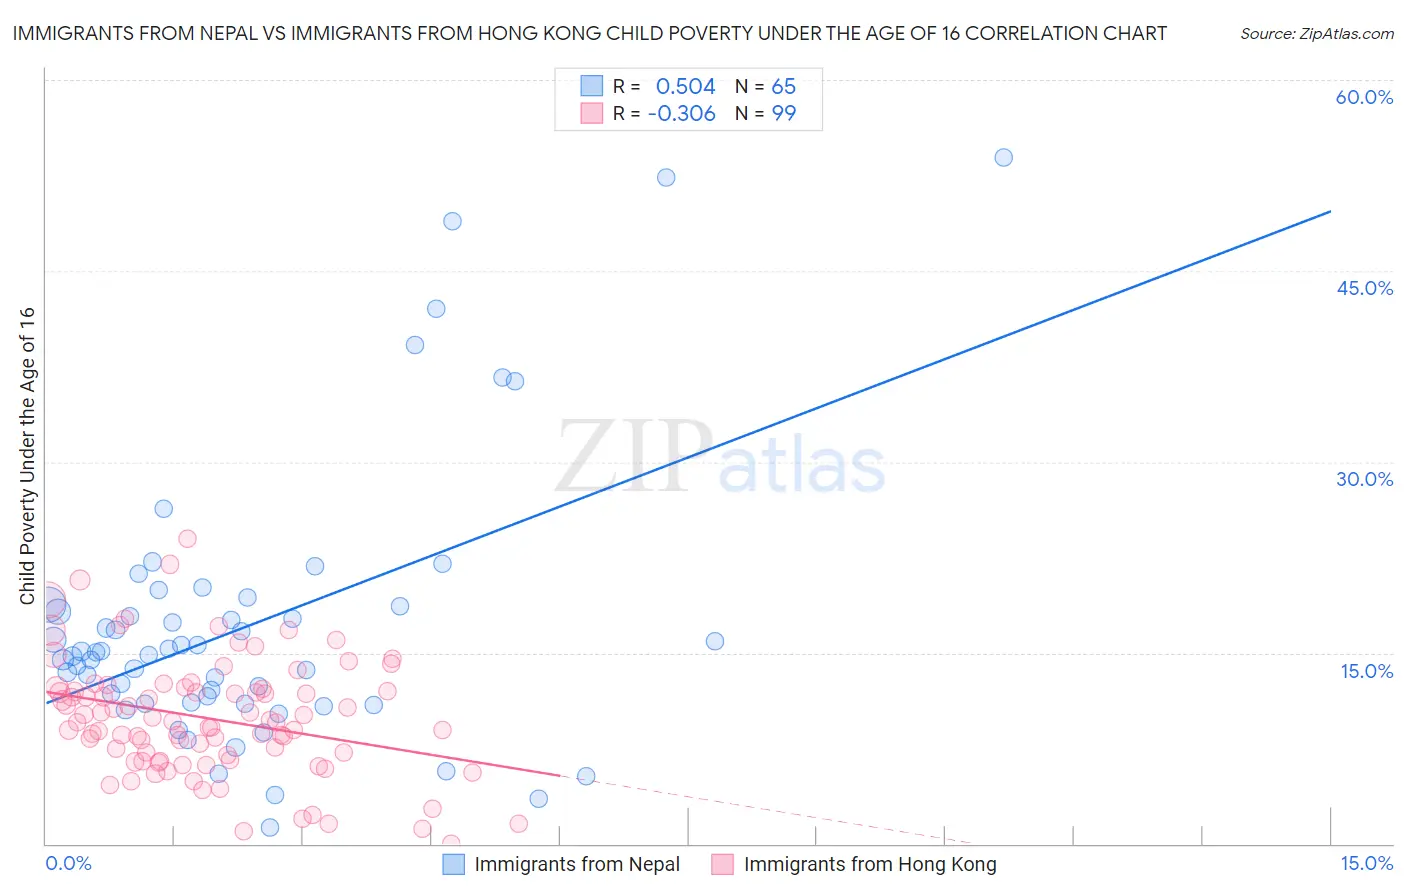 Immigrants from Nepal vs Immigrants from Hong Kong Child Poverty Under the Age of 16